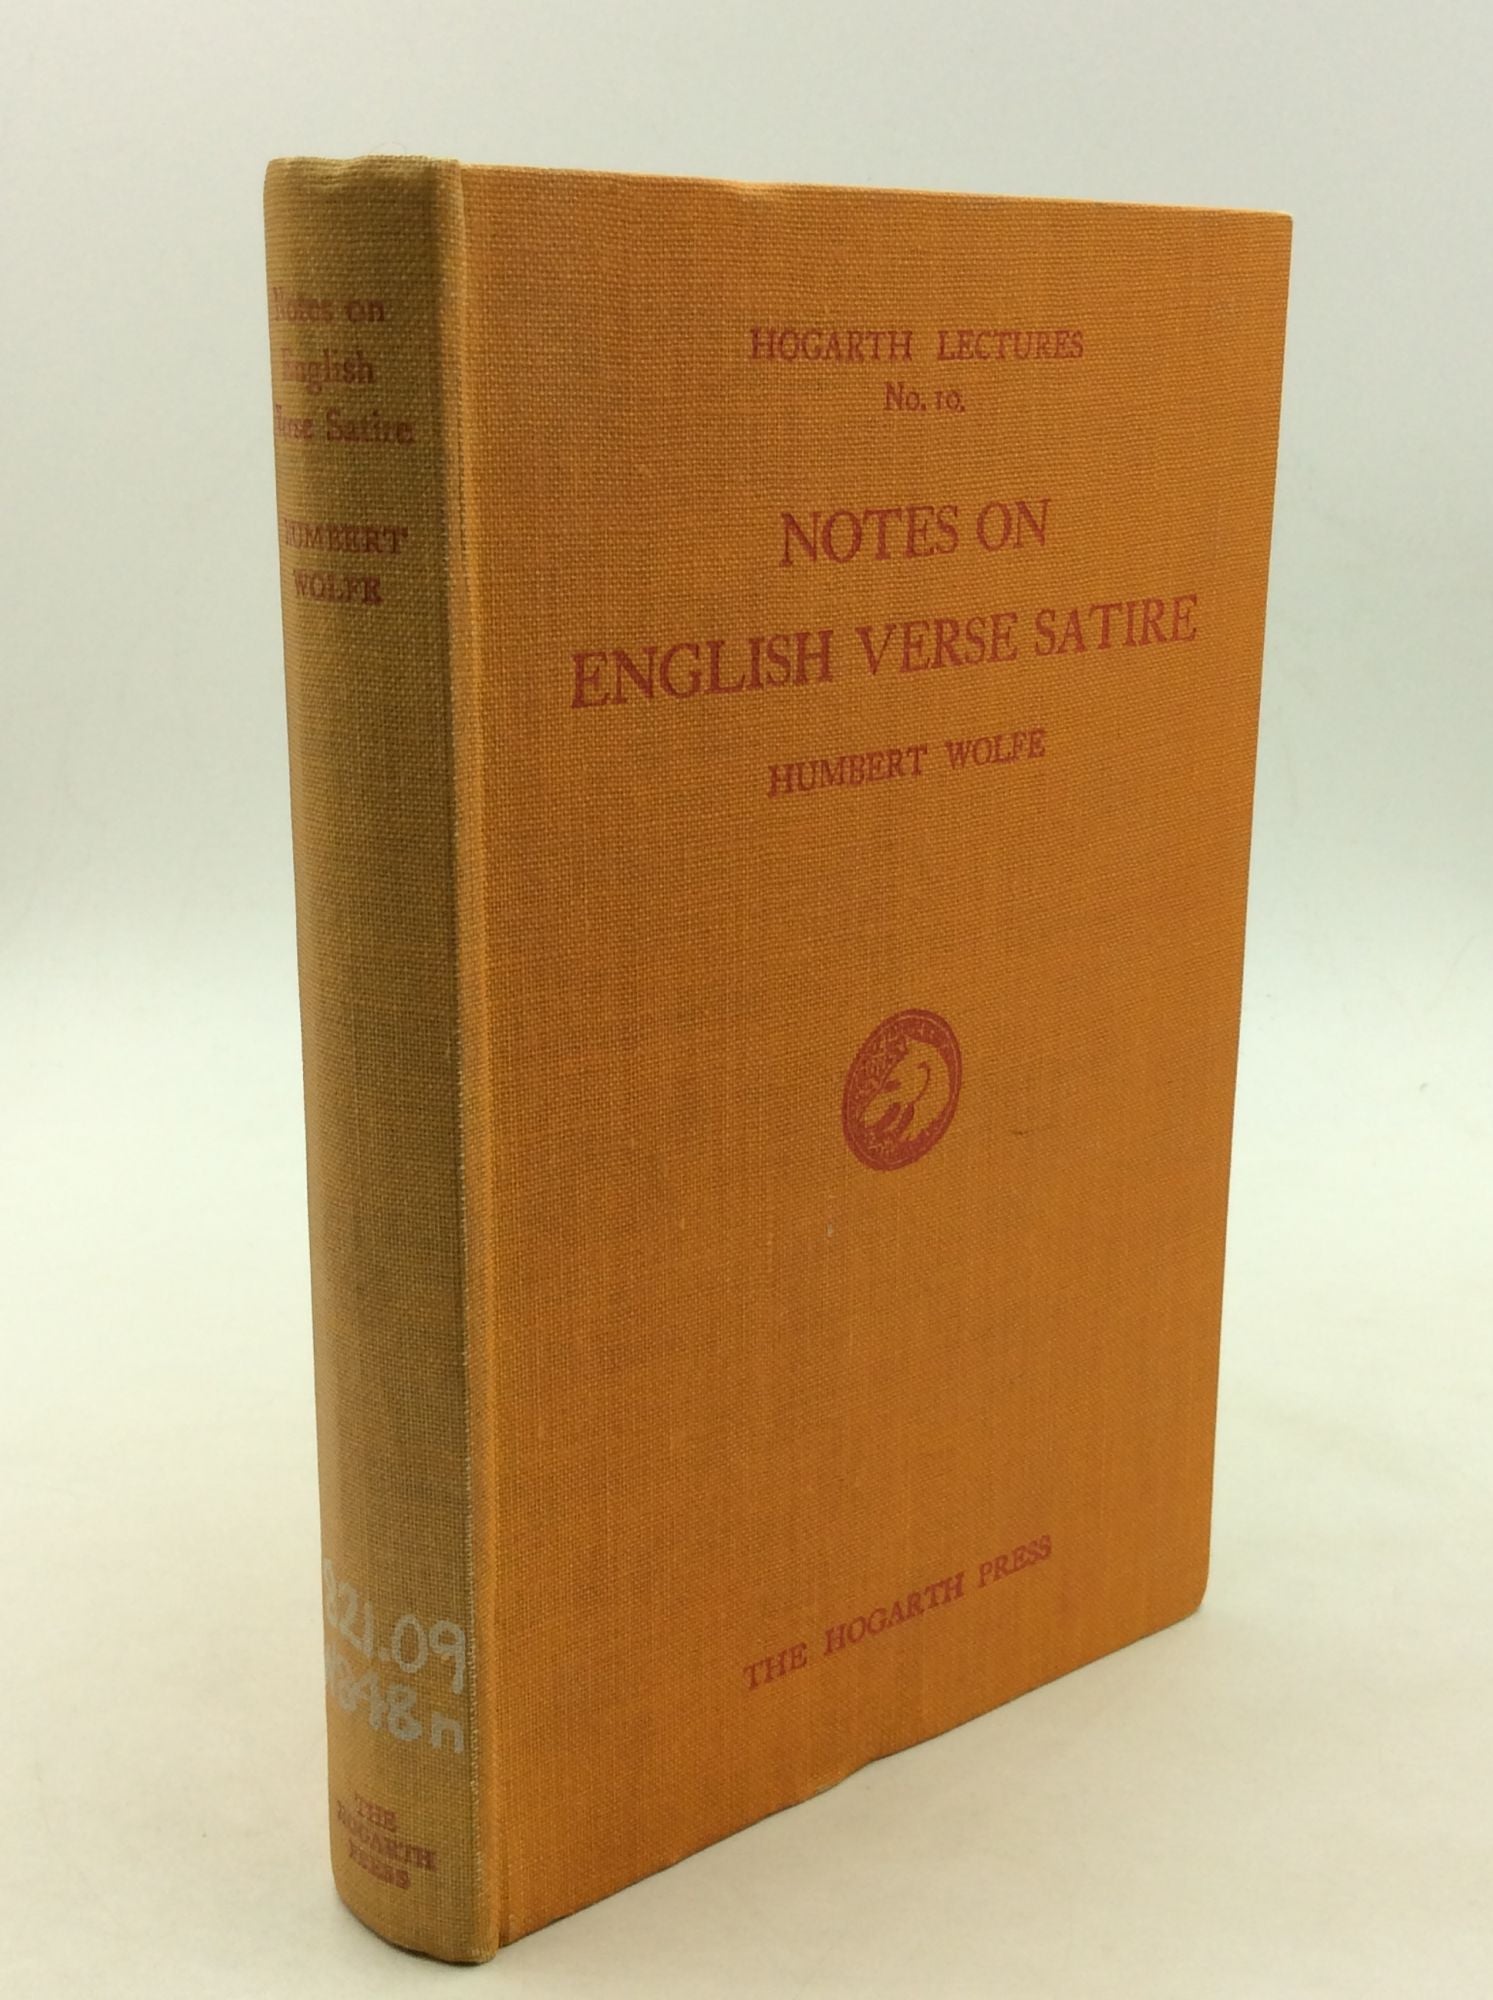 Humbert Wolfe - Notes on English Verse Satire